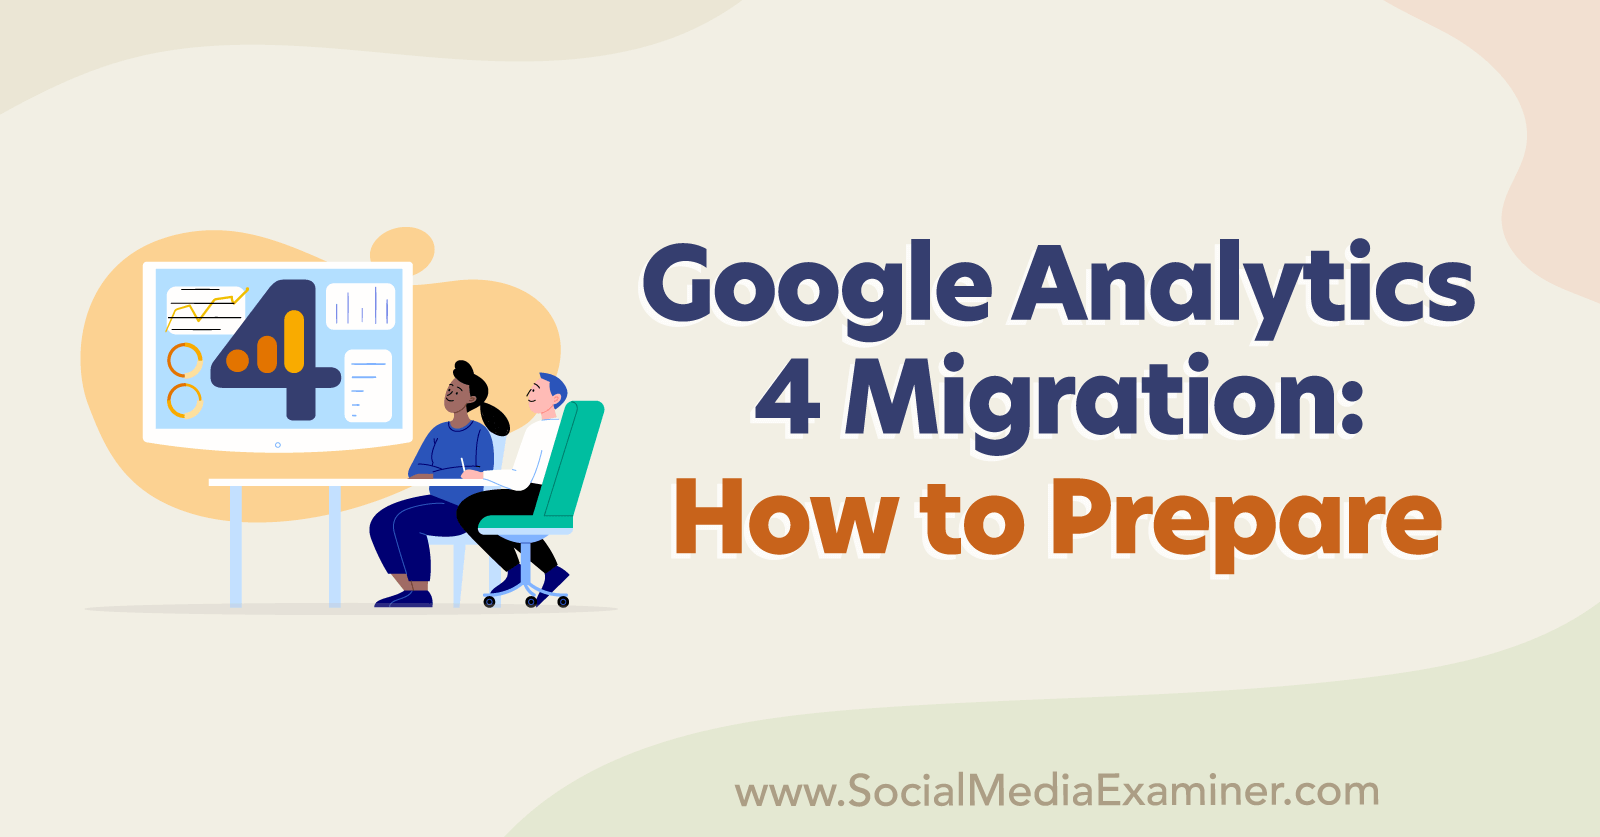 Google Analytics 4 Migration: How to Prepare featuring insights from Chris Mercer on the Social Media Marketing Podcast.